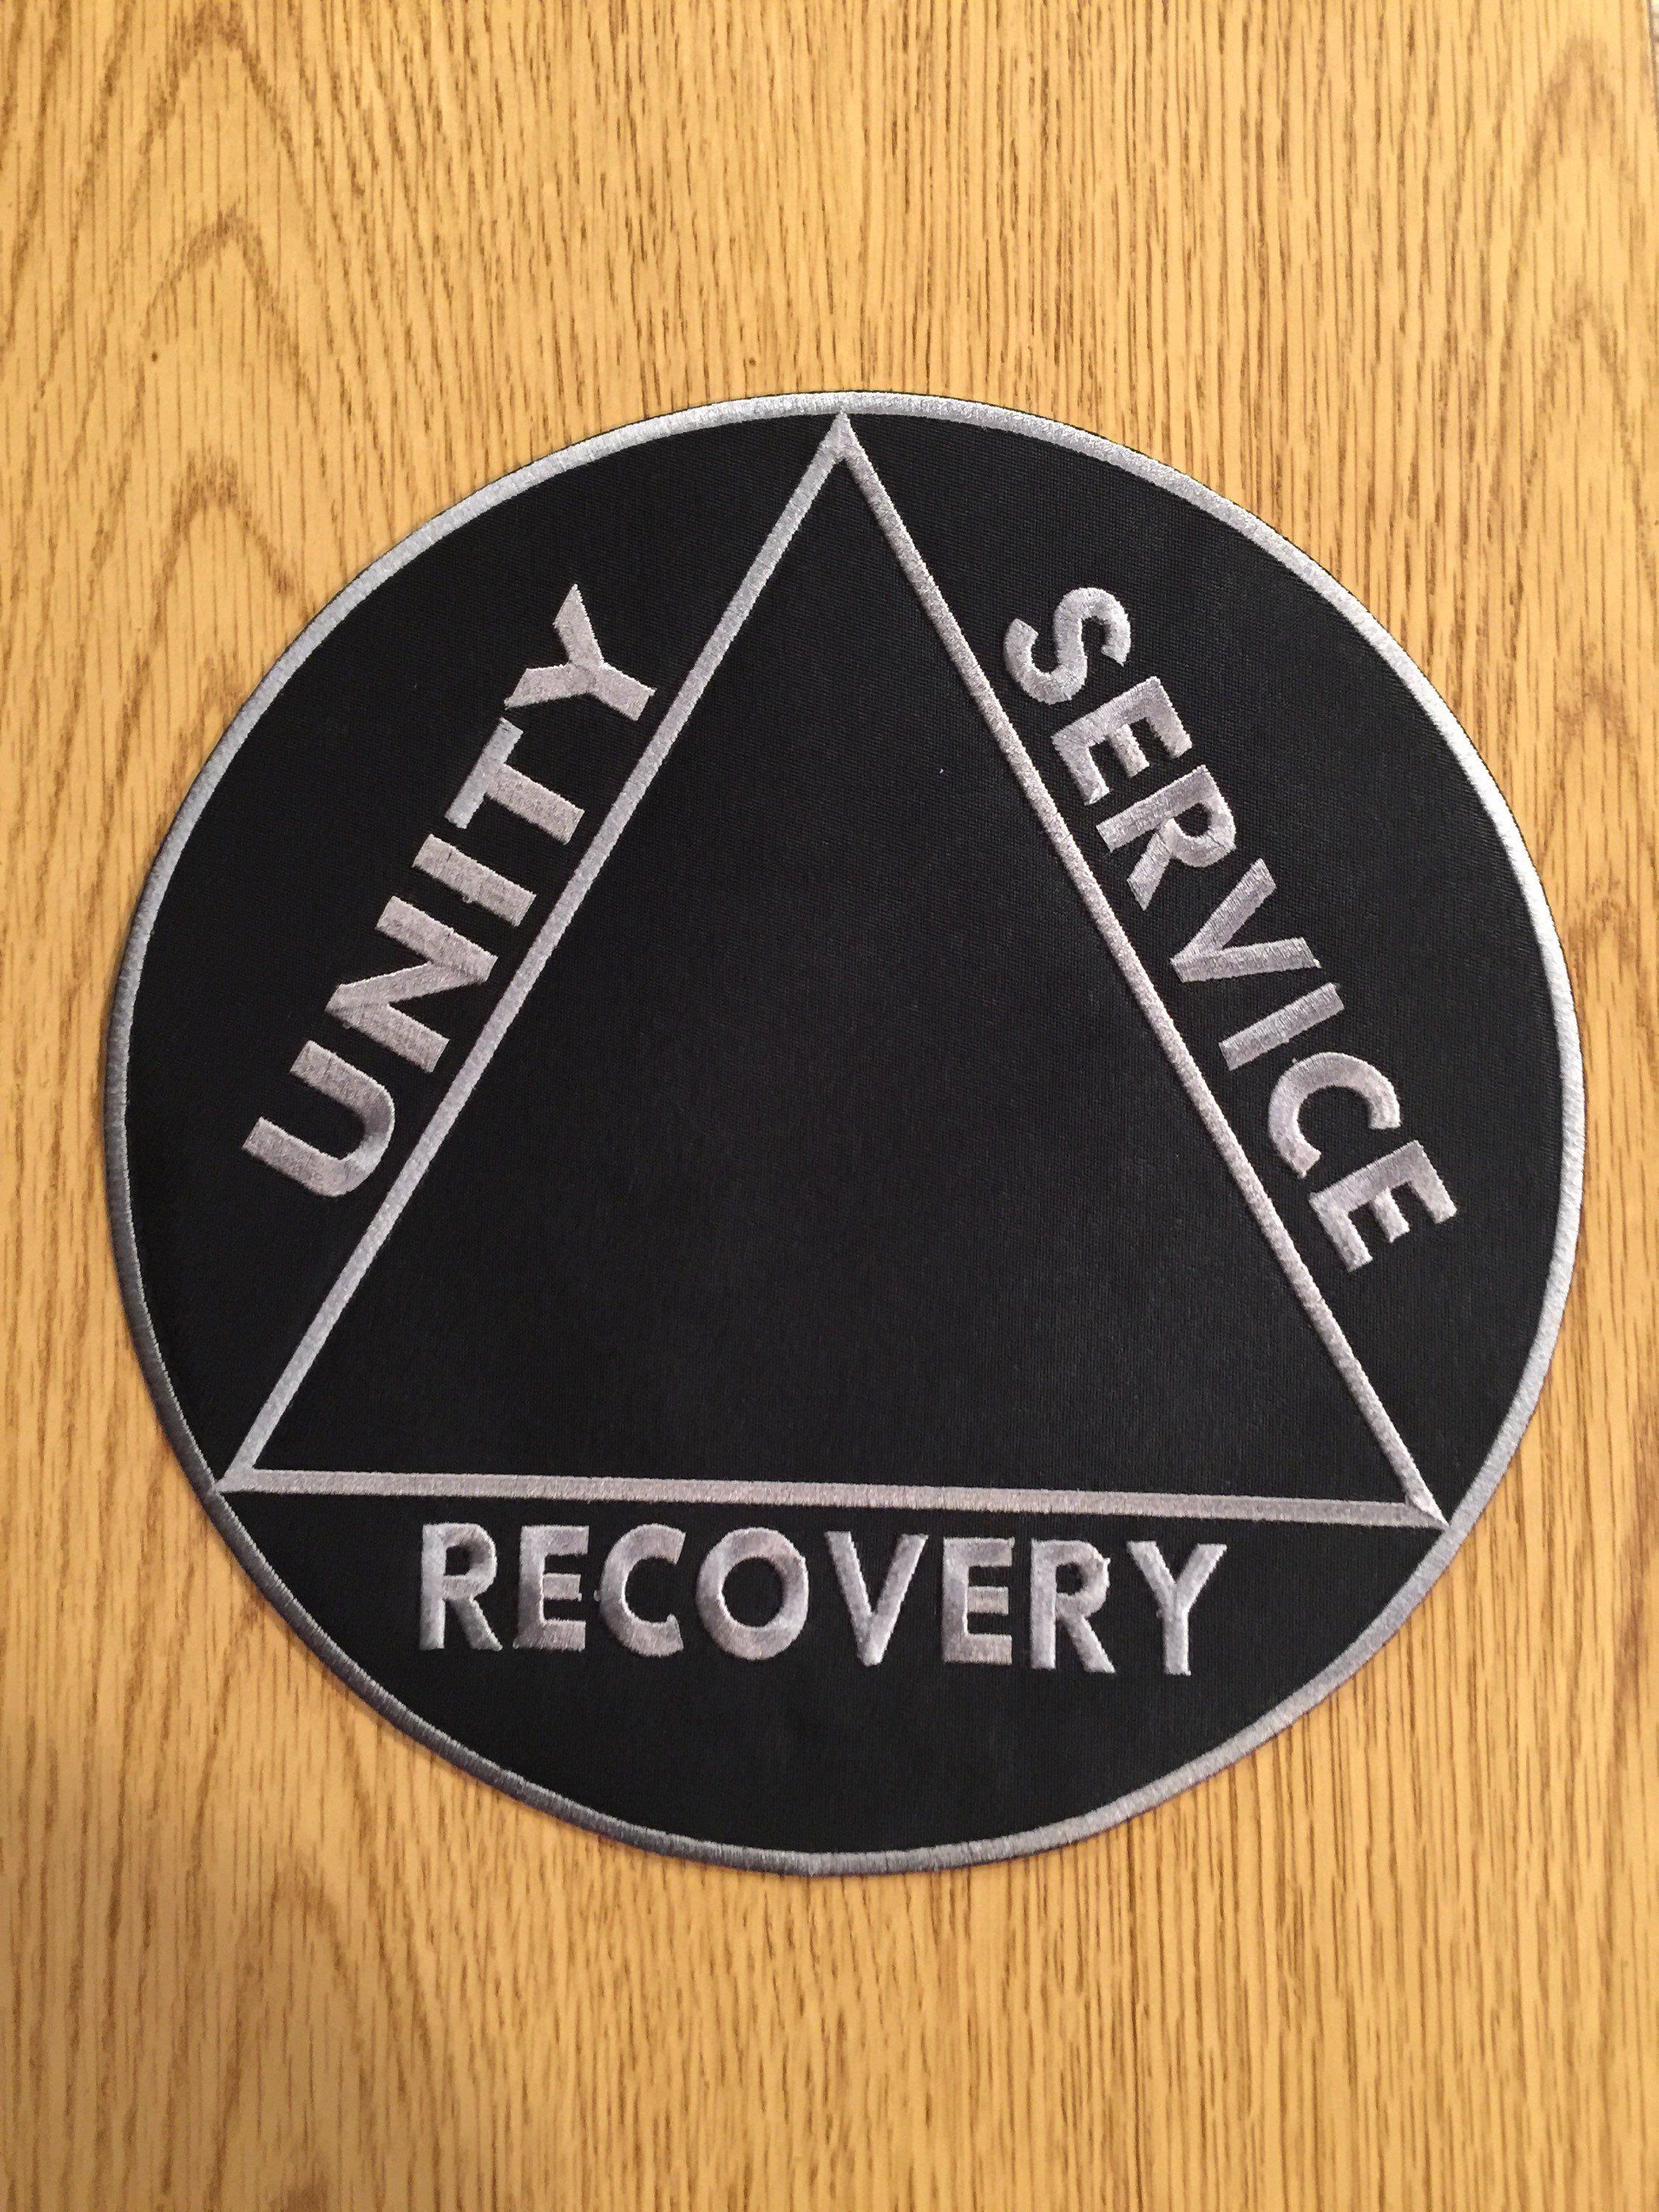 Unity Service Recovery Logo - Service Unity Recovery AA / Patch in multiple sizes | Etsy